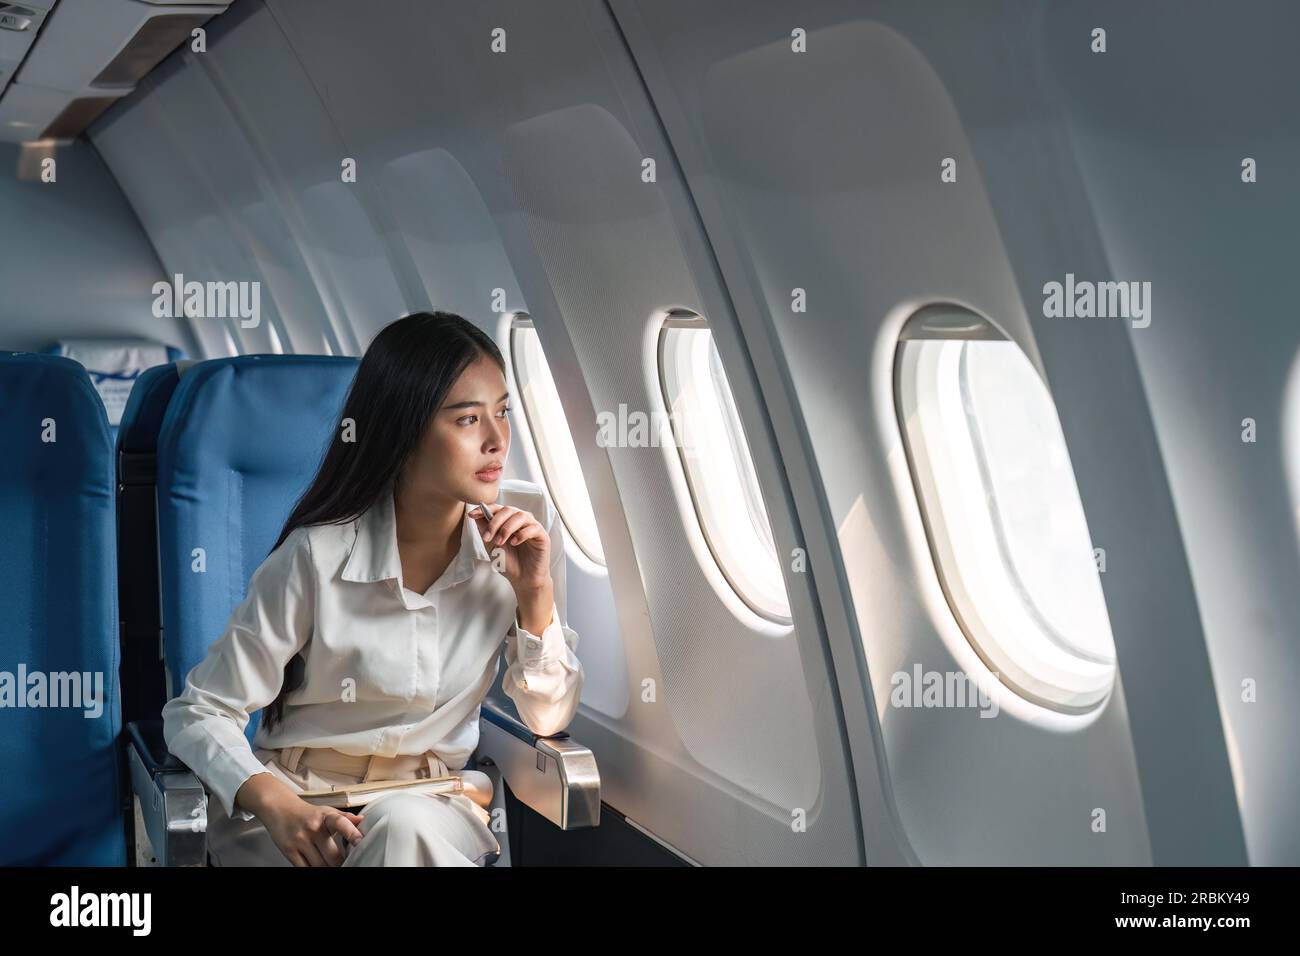 Asian woman passenger sitting in airplane near window and looking out the window Stock Photo